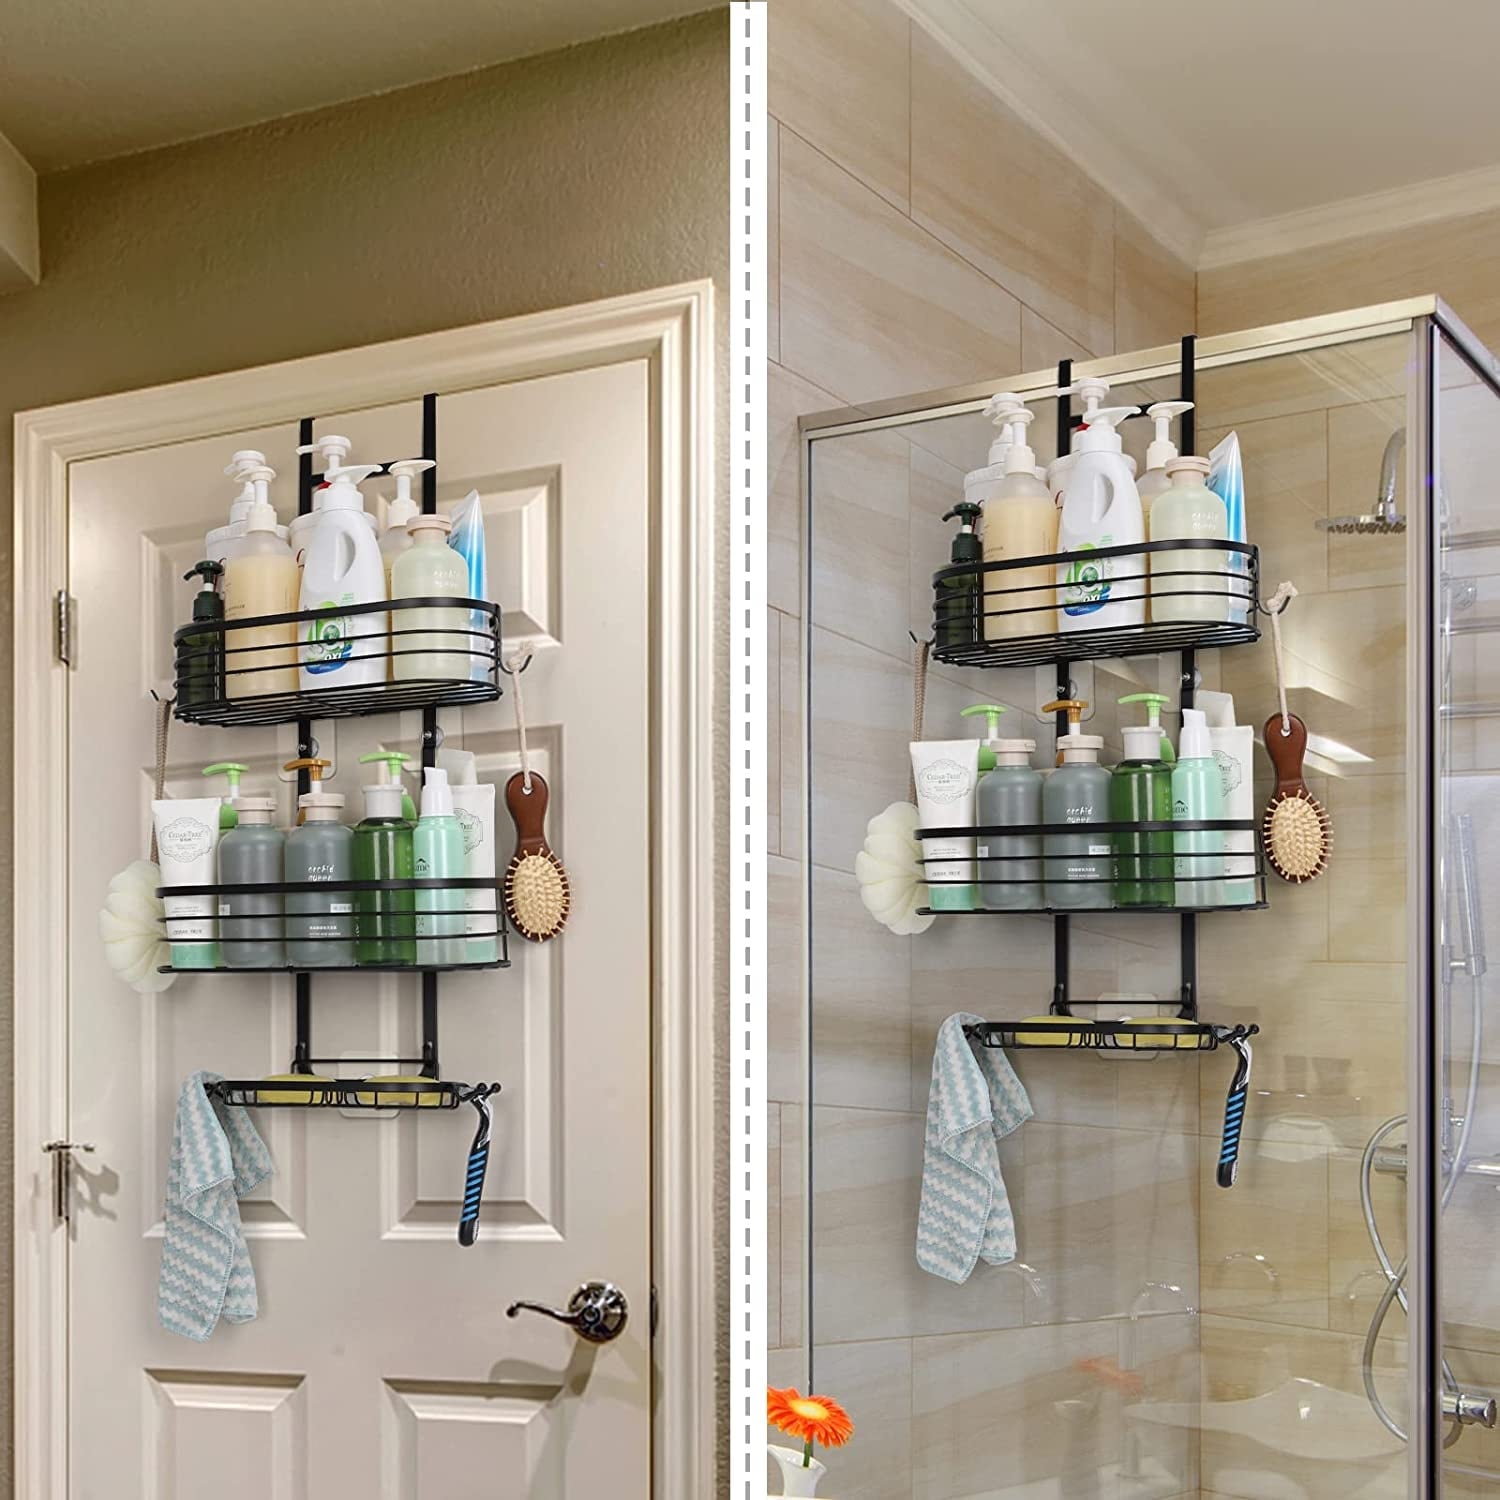 https://ak1.ostkcdn.com/images/products/is/images/direct/a579ae7637a78a43eb5de7c1f362ab2689a709cd/Over-the-Door-Shower-Caddy.jpg